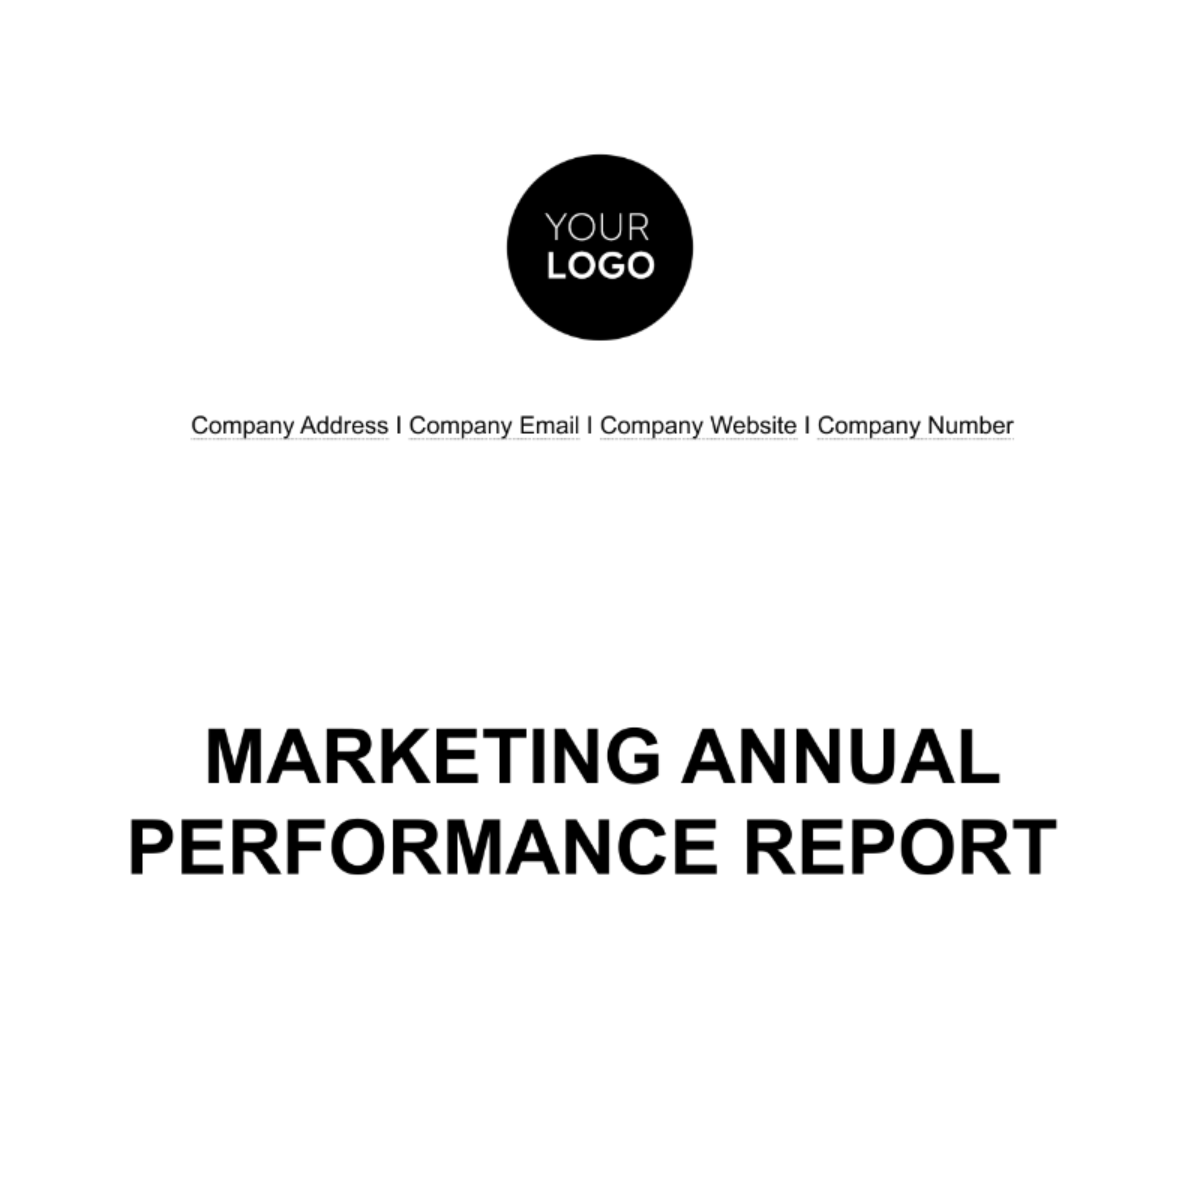 Marketing Annual Performance Report Template